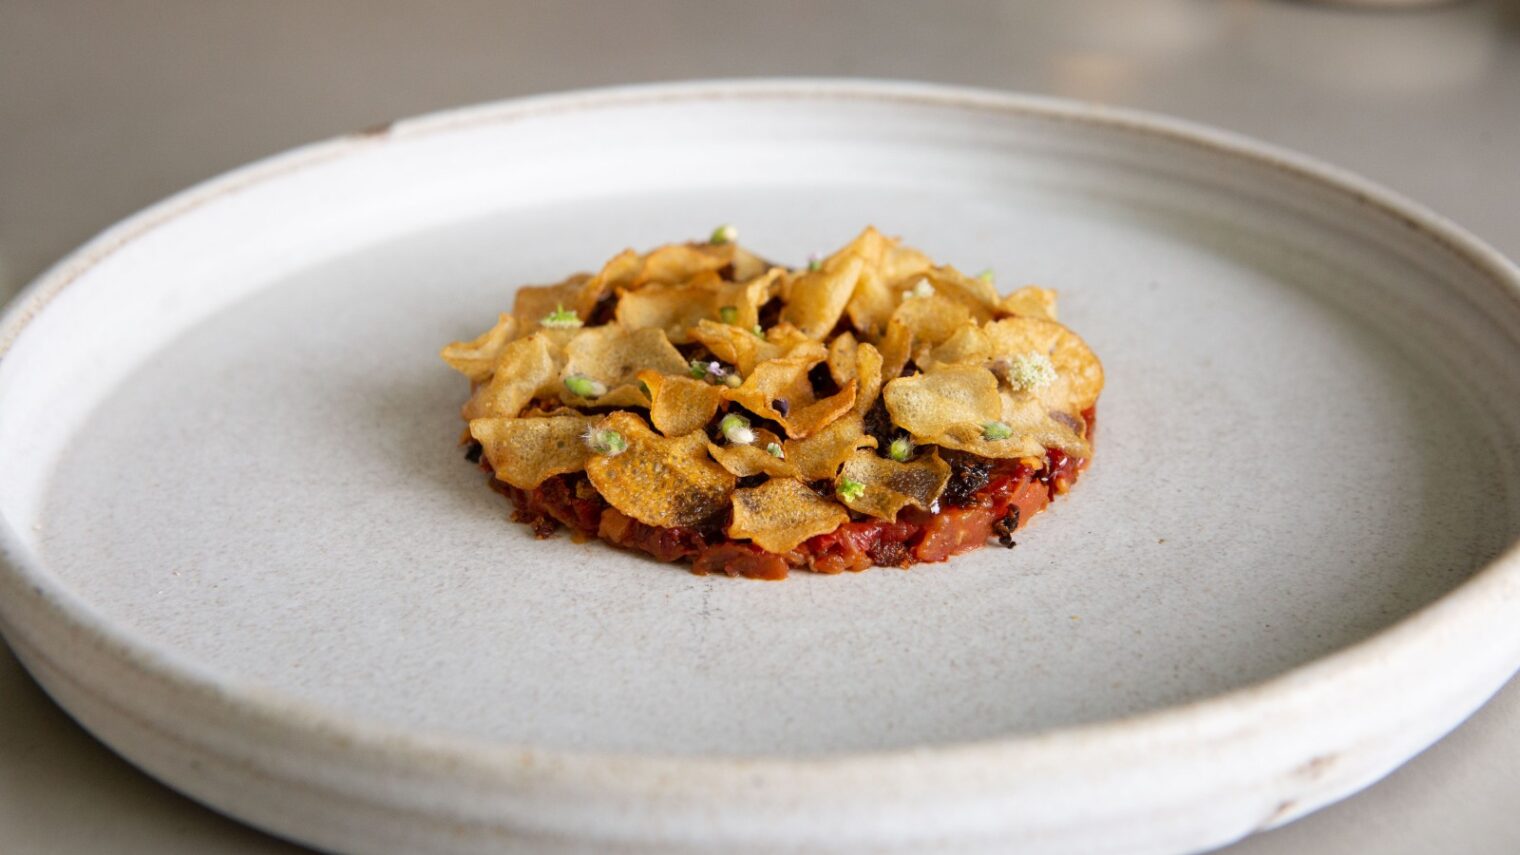 An Opa dish composed of tomato, shallots, berries, lemon and basil. Photo by Aviv Shkury